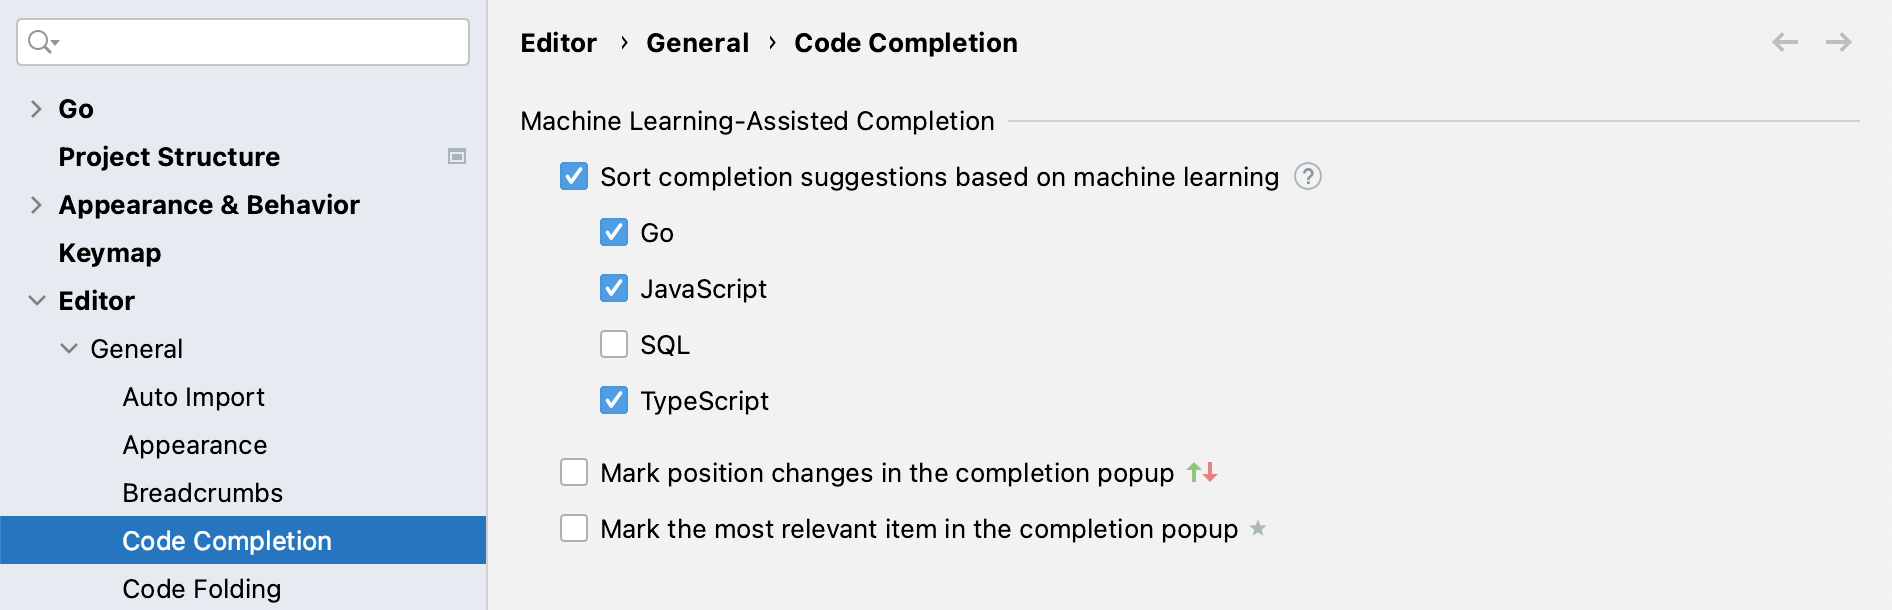 Use machine-learning-assisted code completion